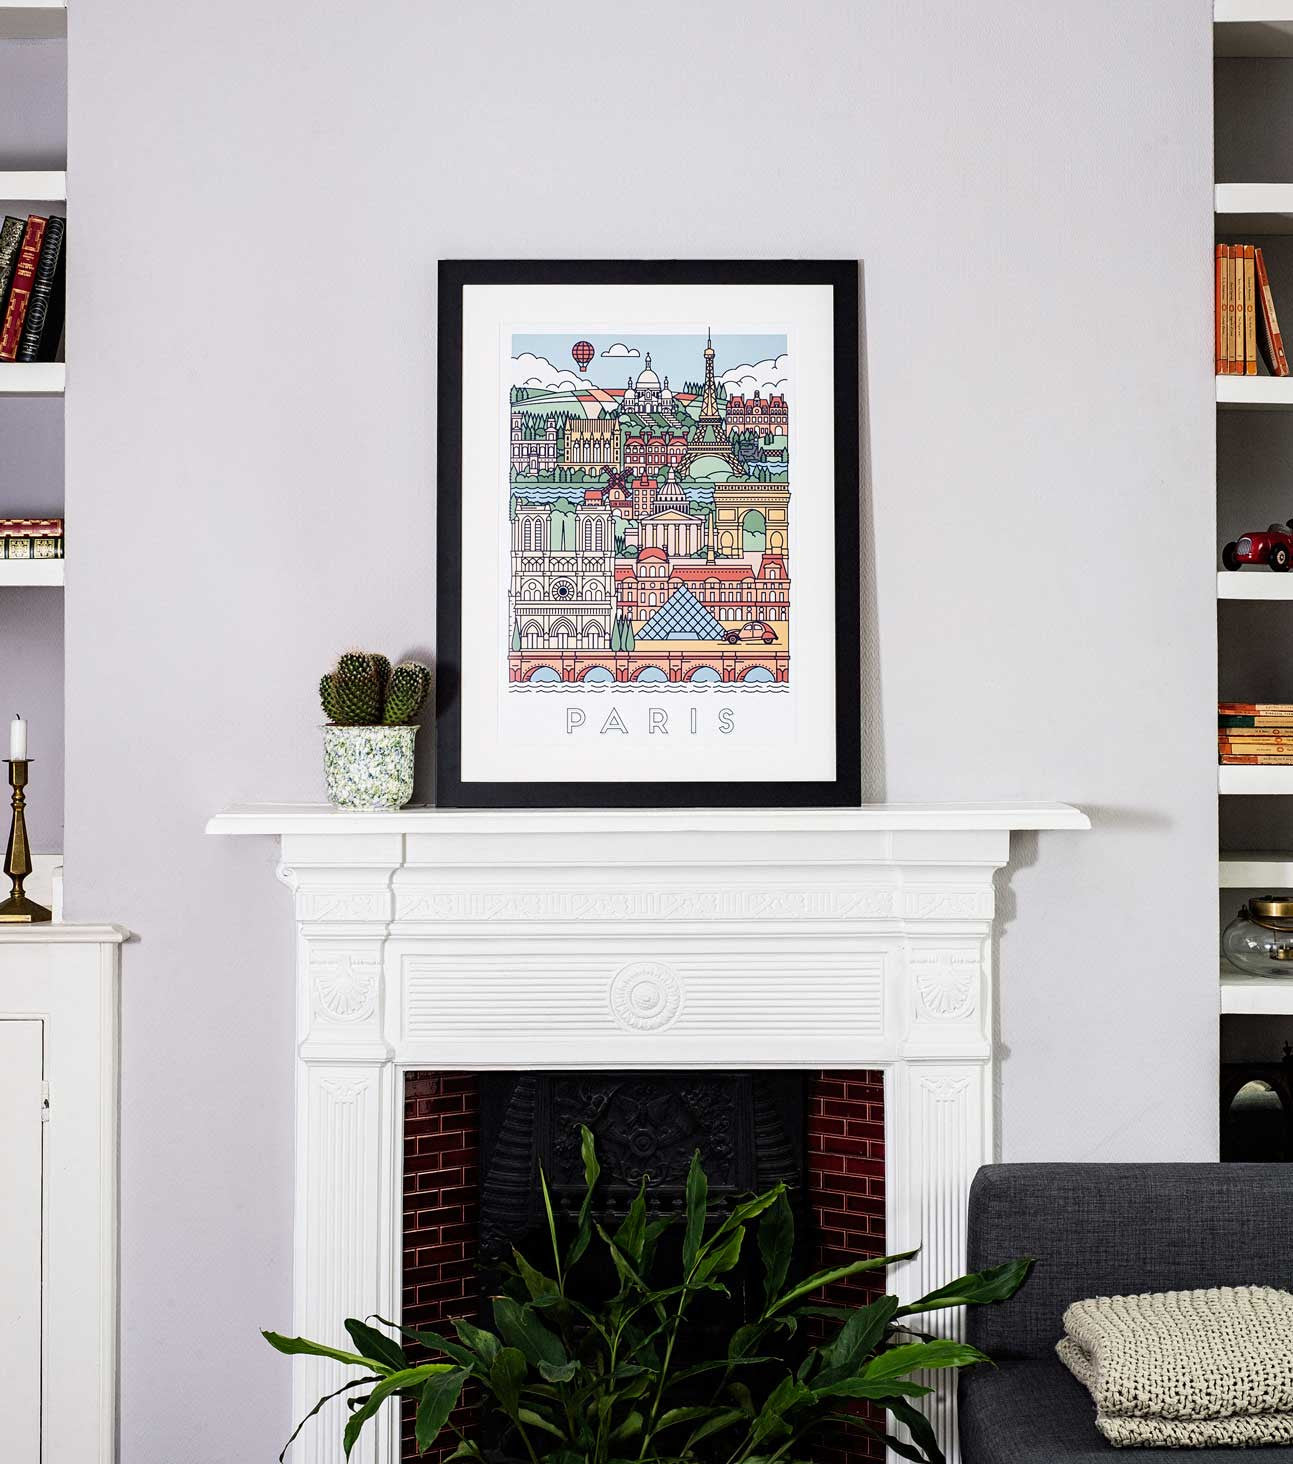 Graphical Poster of Paris – Great Little Print Store